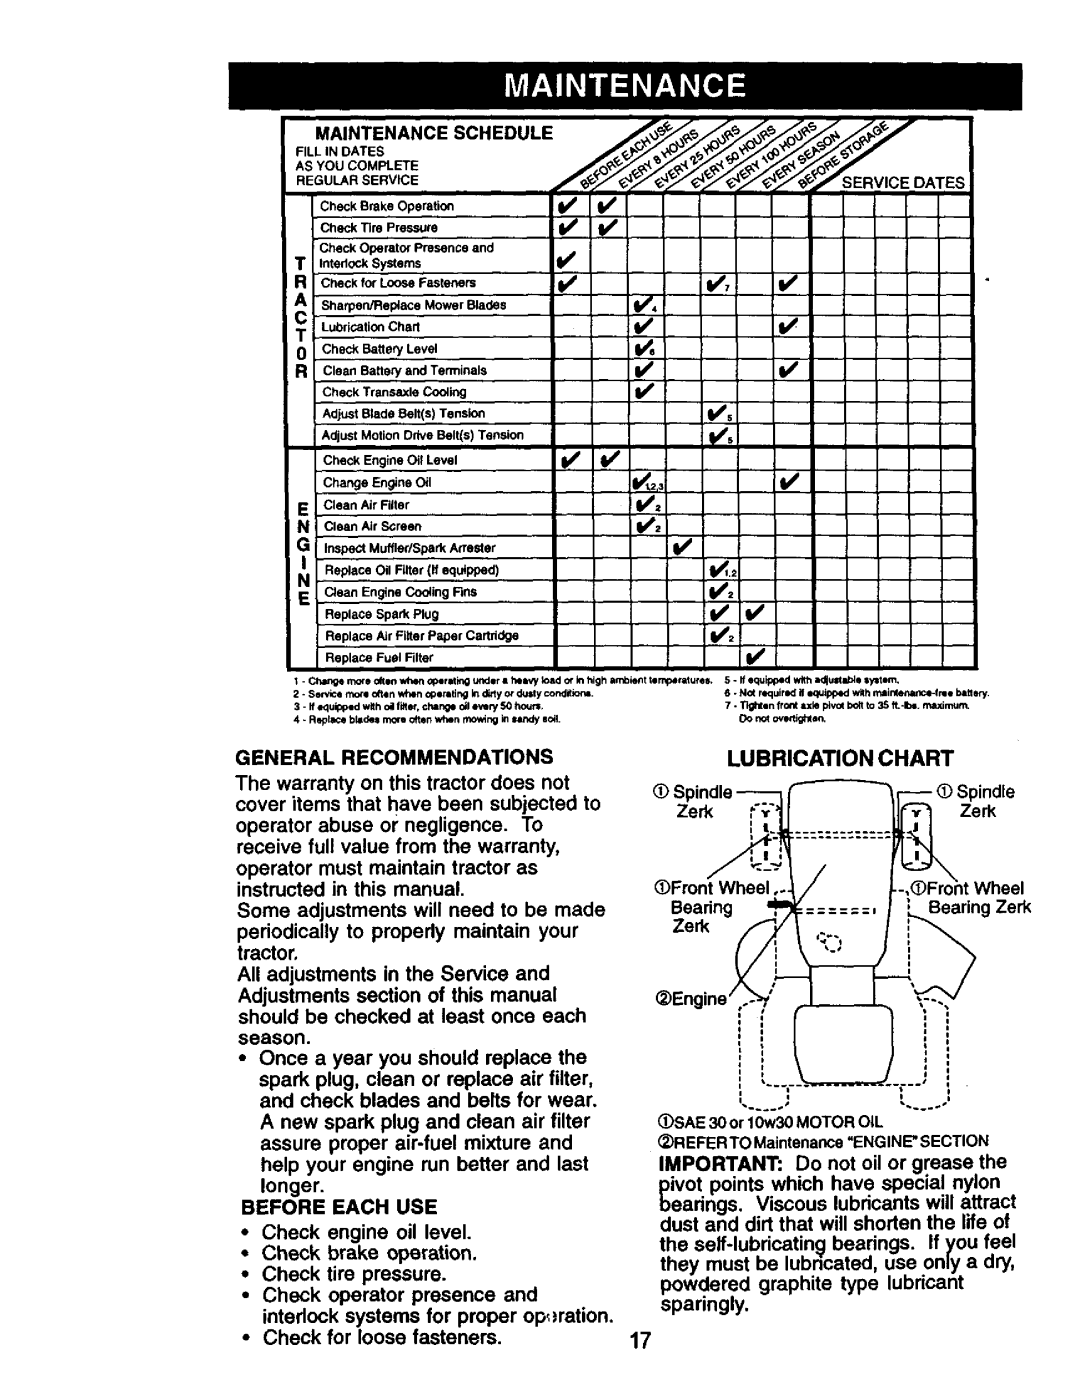 Craftsman 917.271061 owner manual Lubrication Chart, Oeoates 